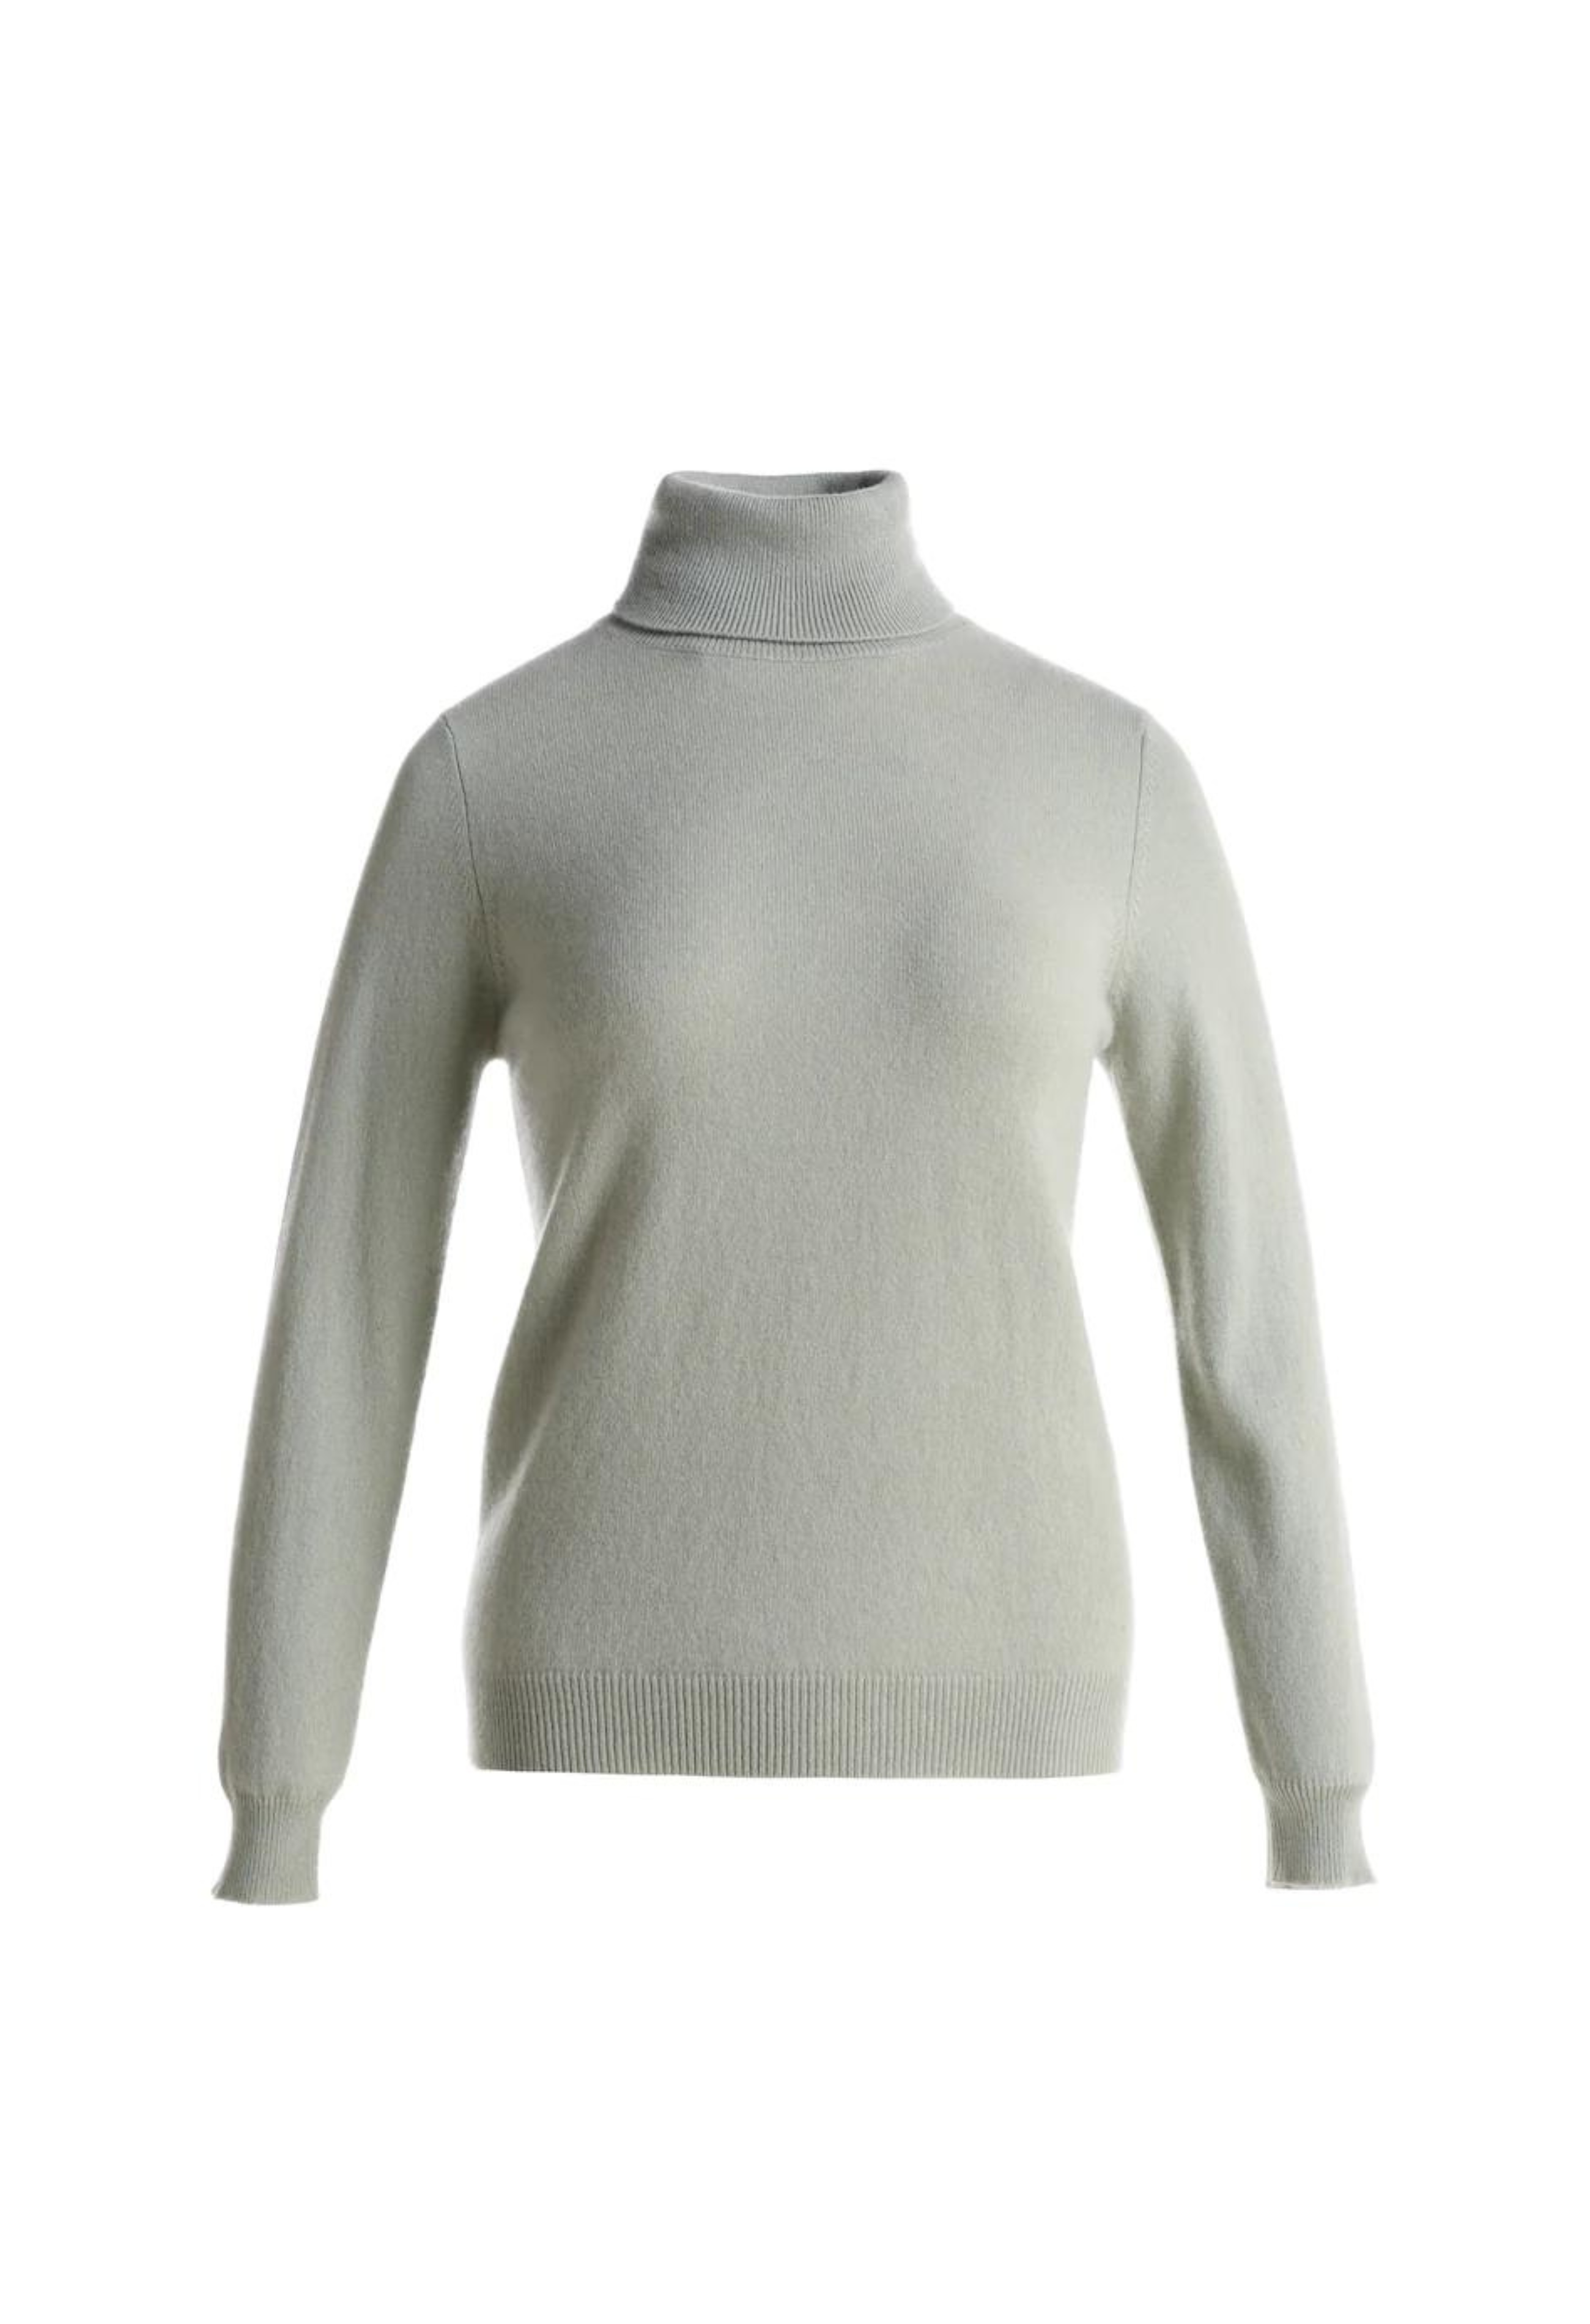 Fitted Turtleneck Sweater (Cashmere & Merino Wool)